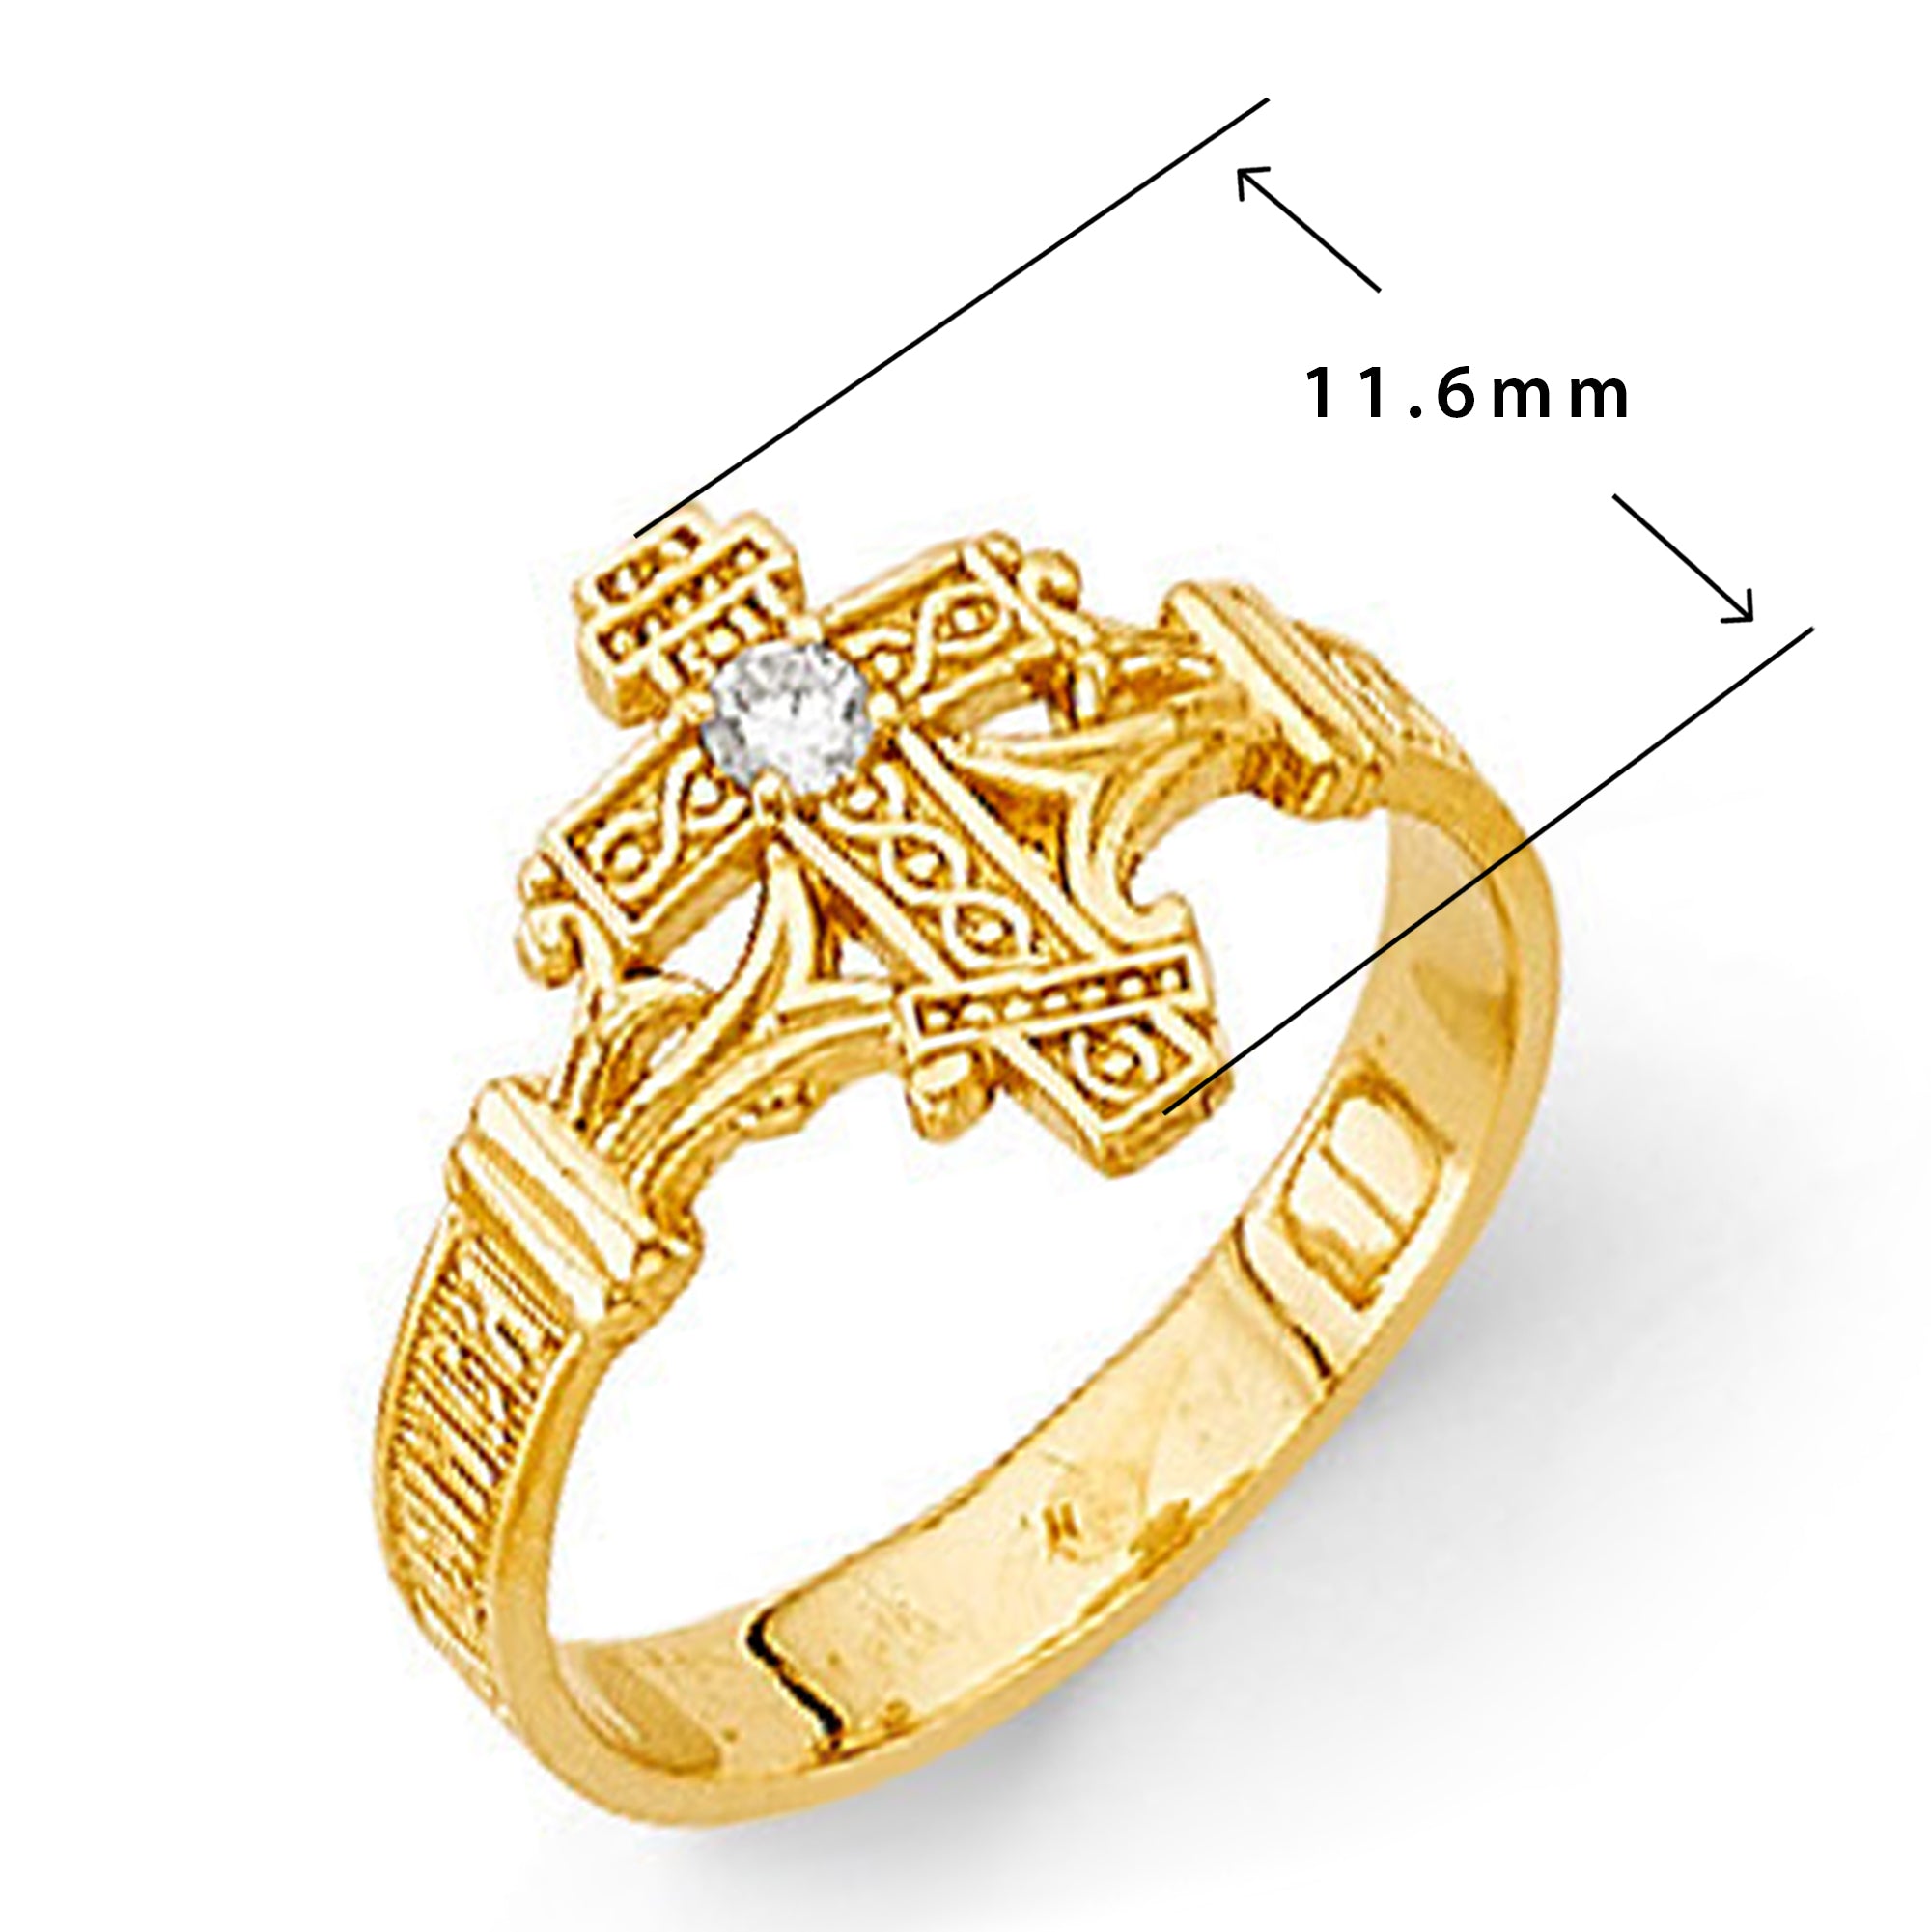 Textured Religious Cross Ring in Solid Gold with Measurement